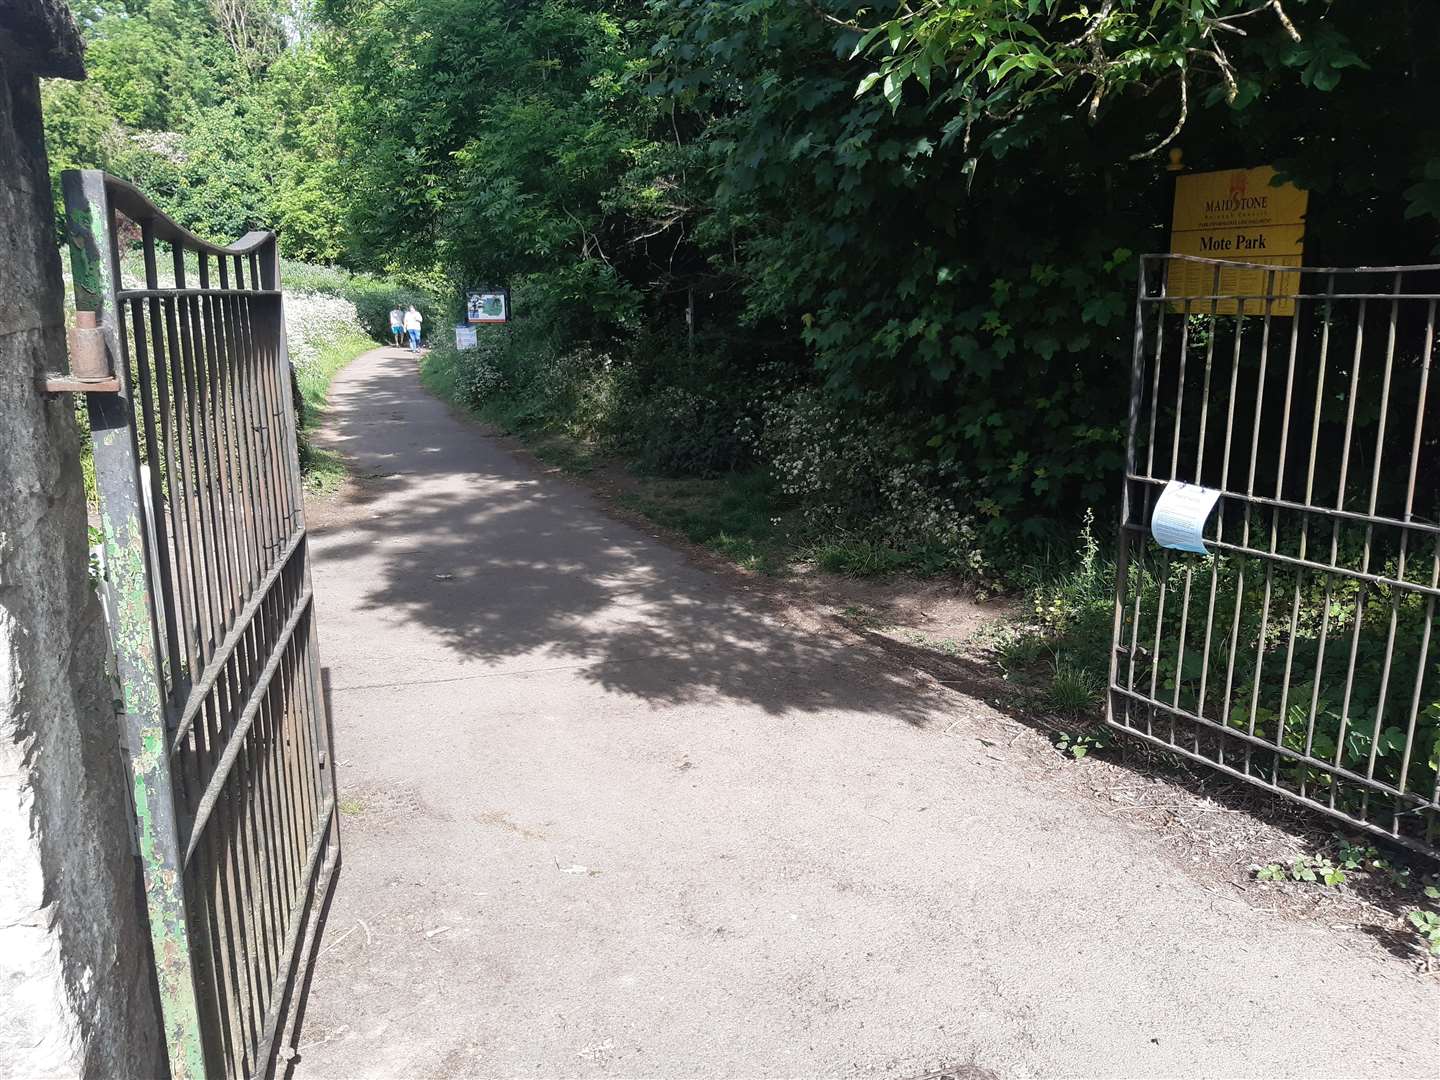 An entrance to Mote Park is immediately opposite the junction